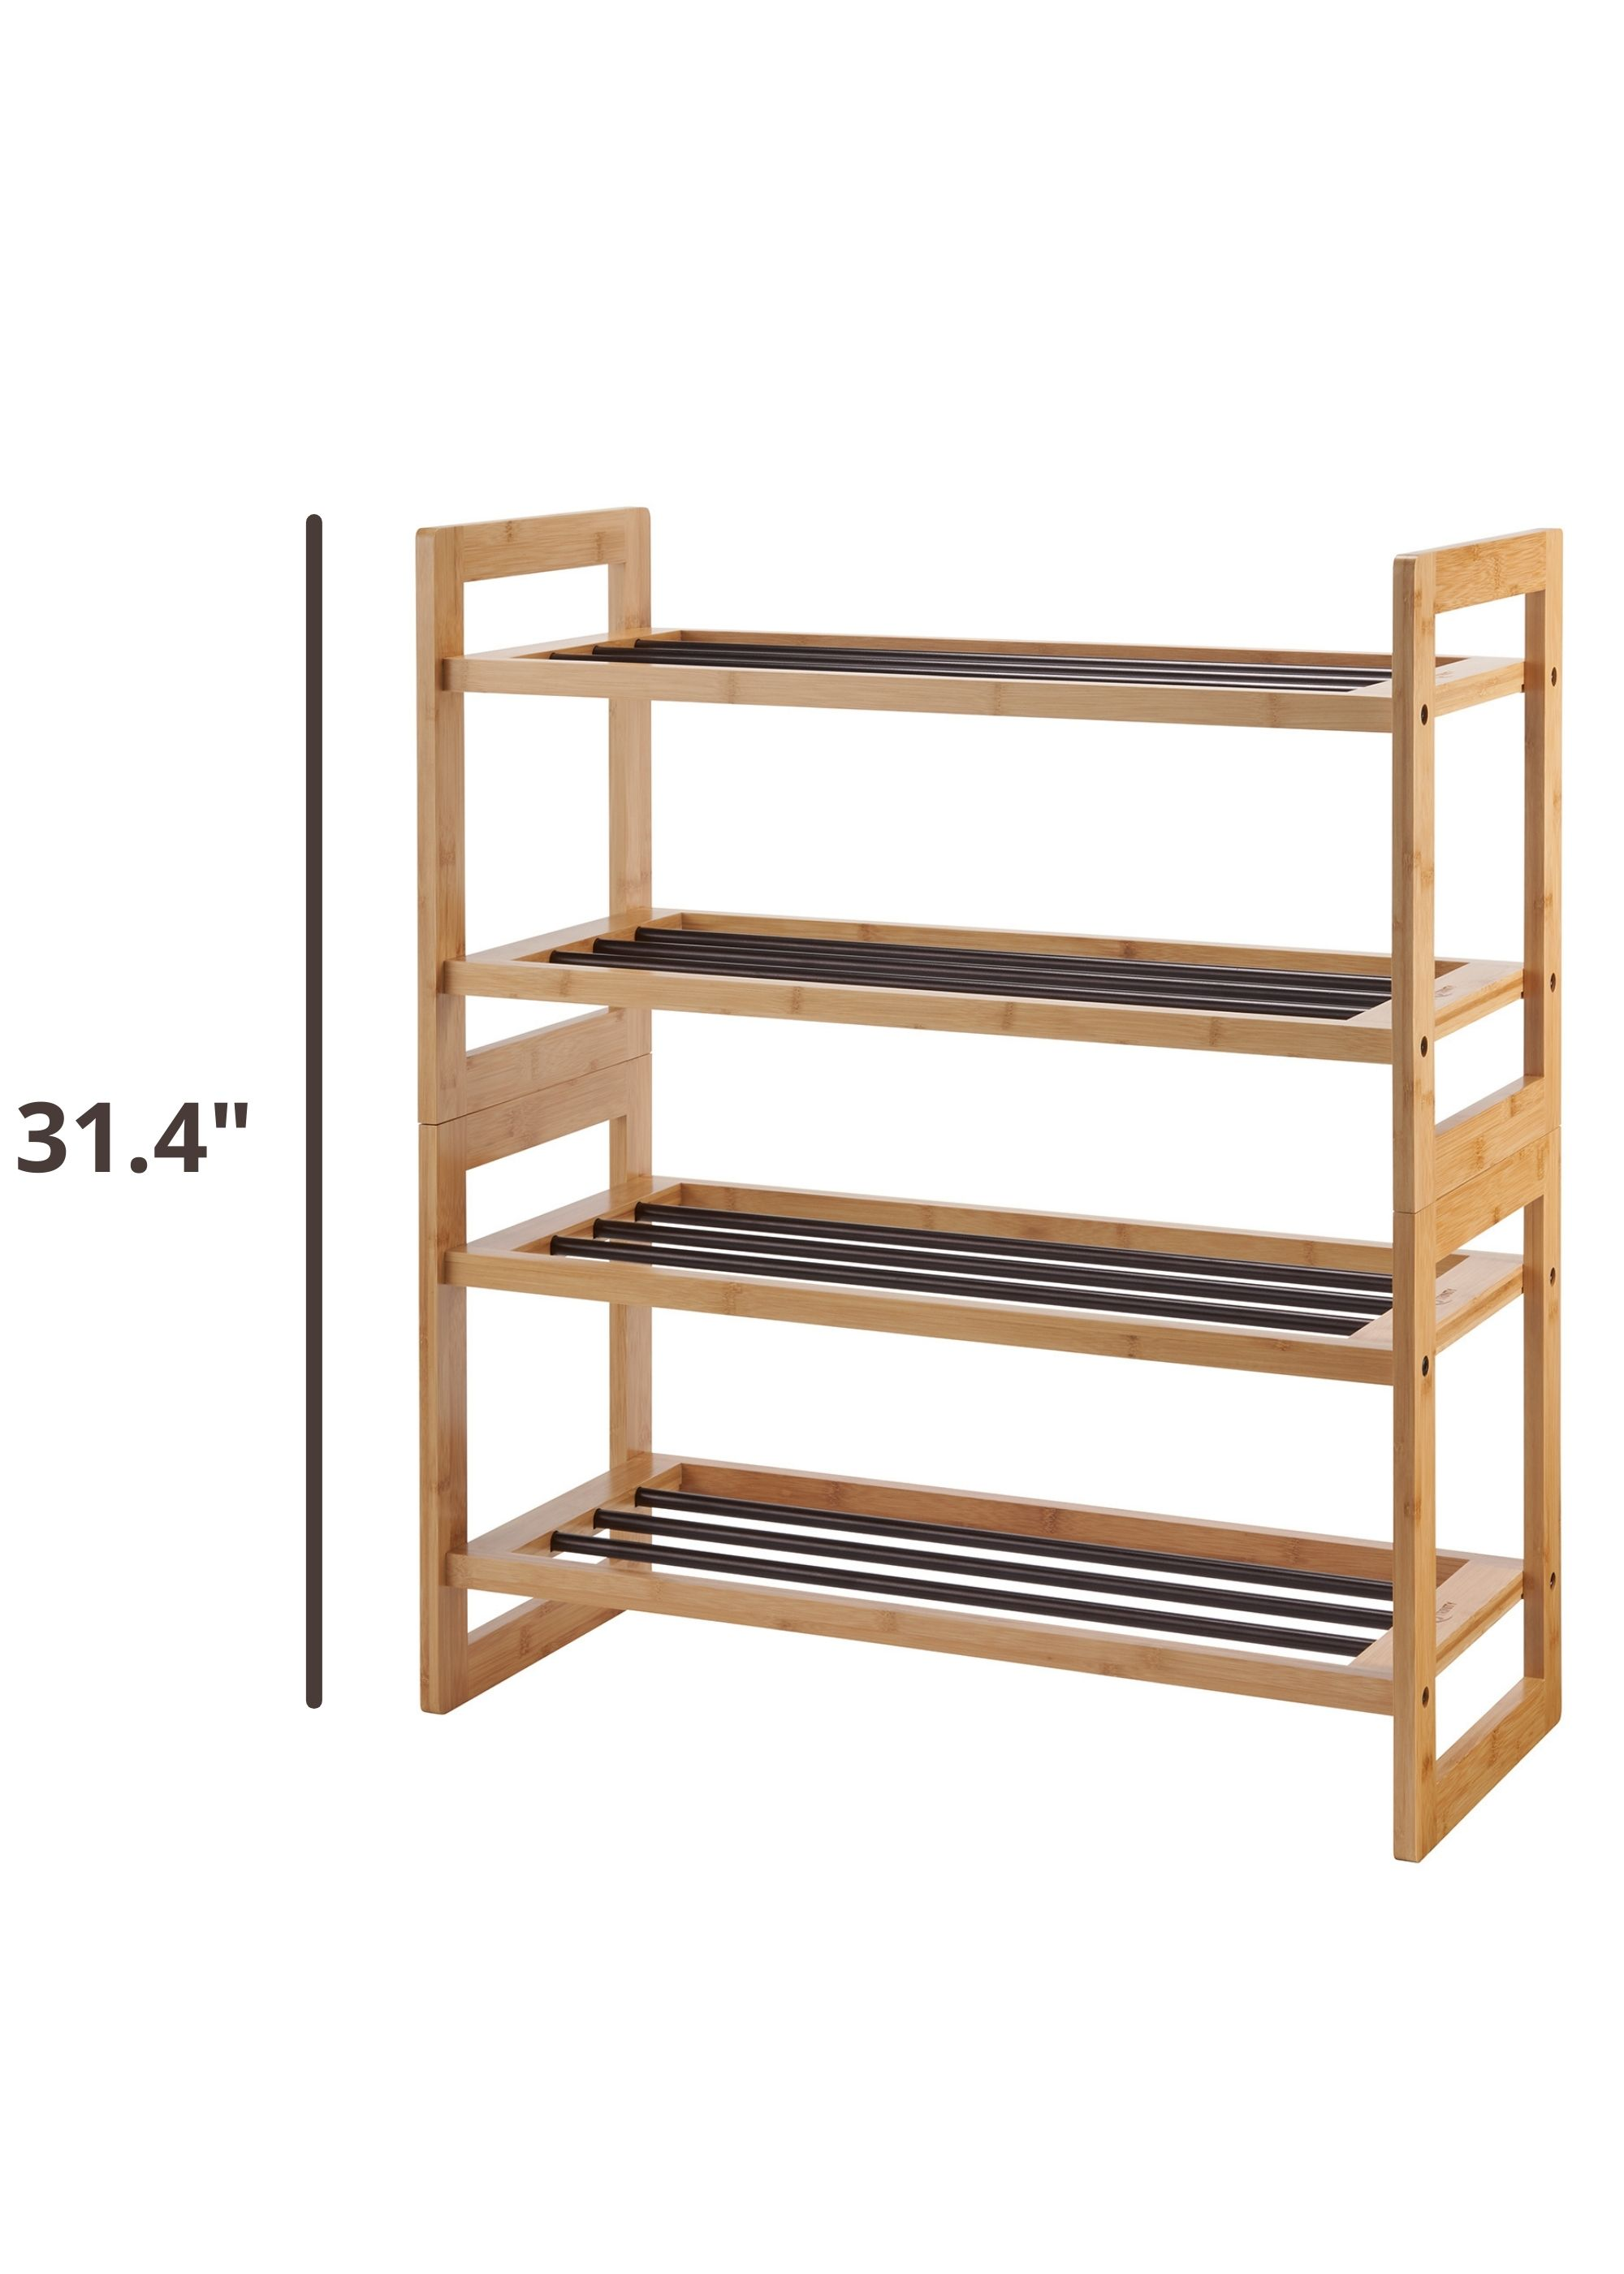 31.4 inches overall height when two shoe racks are stacked